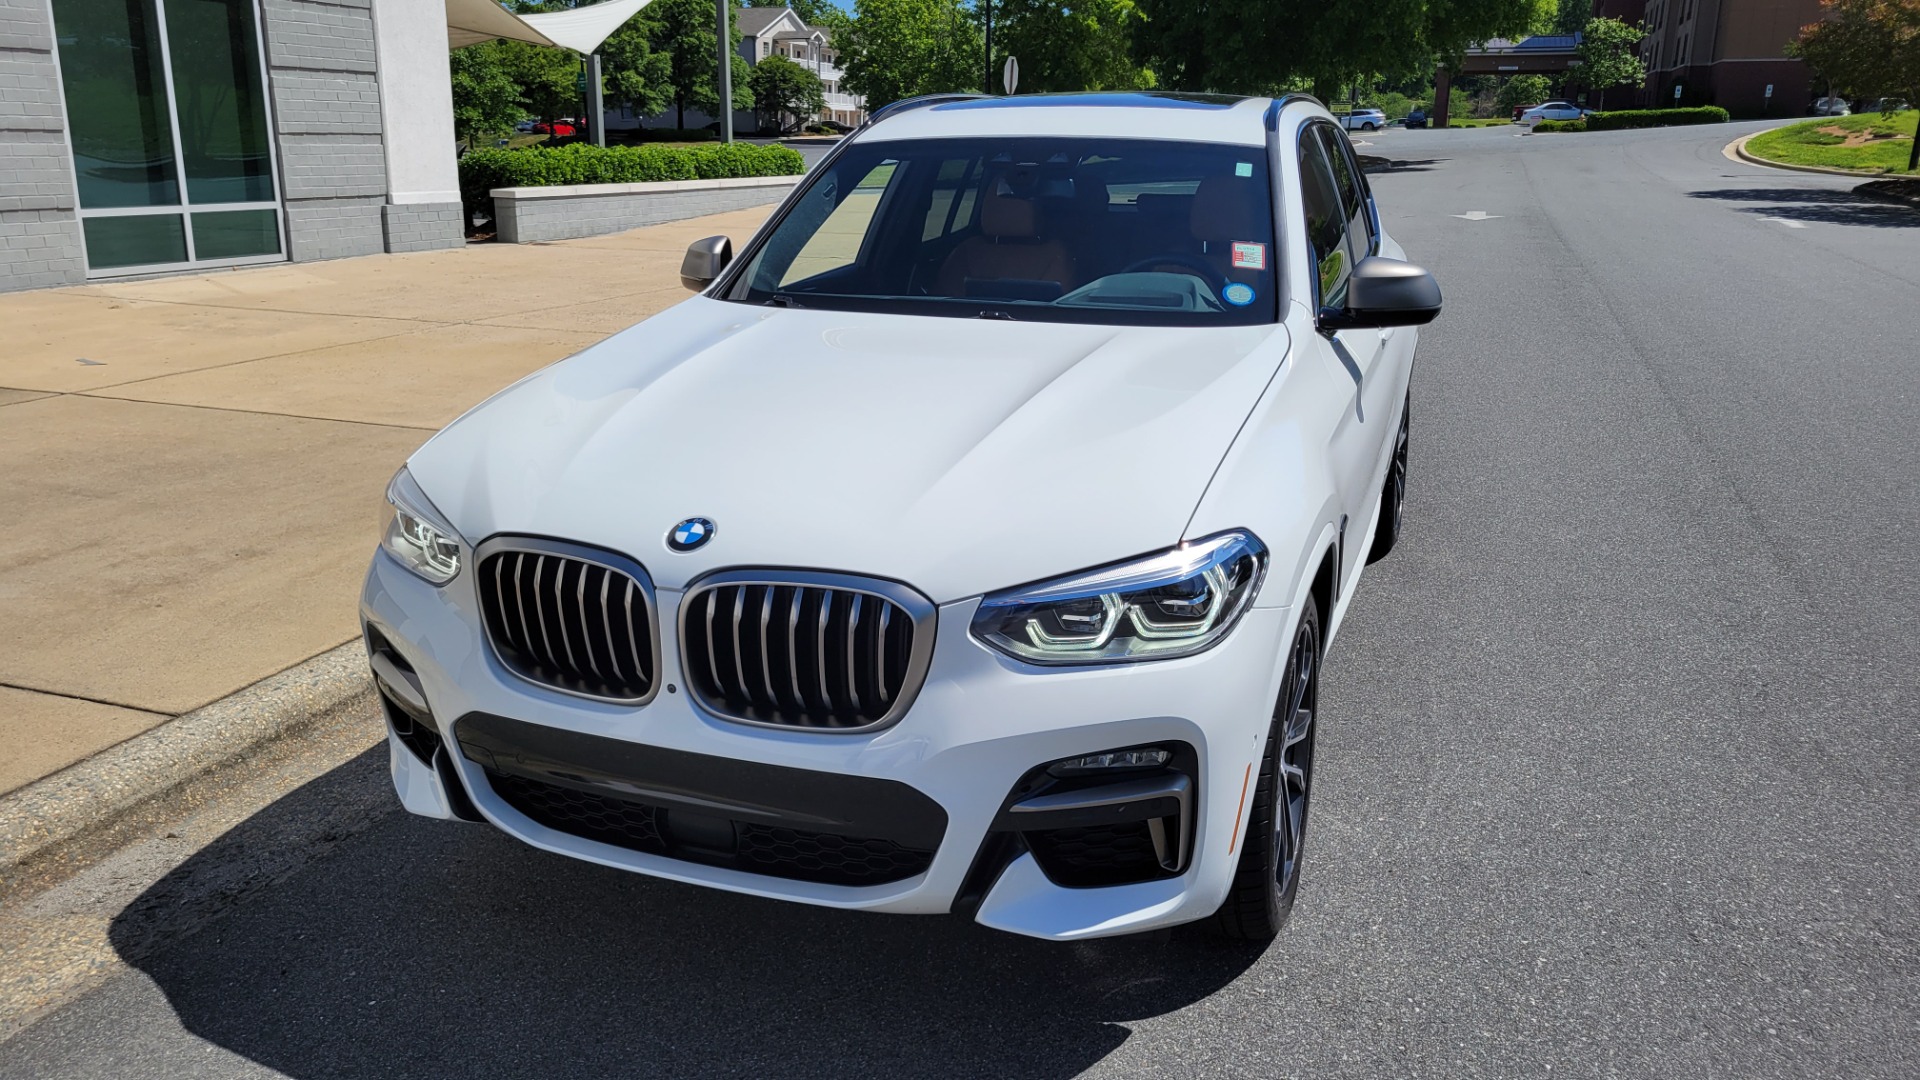 Used 2020 BMW X3 M40I EXECUTIVE PKG / DRVR ASST PLUS / H/K SND / HITCH / REARVIEW for sale $55,995 at Formula Imports in Charlotte NC 28227 2